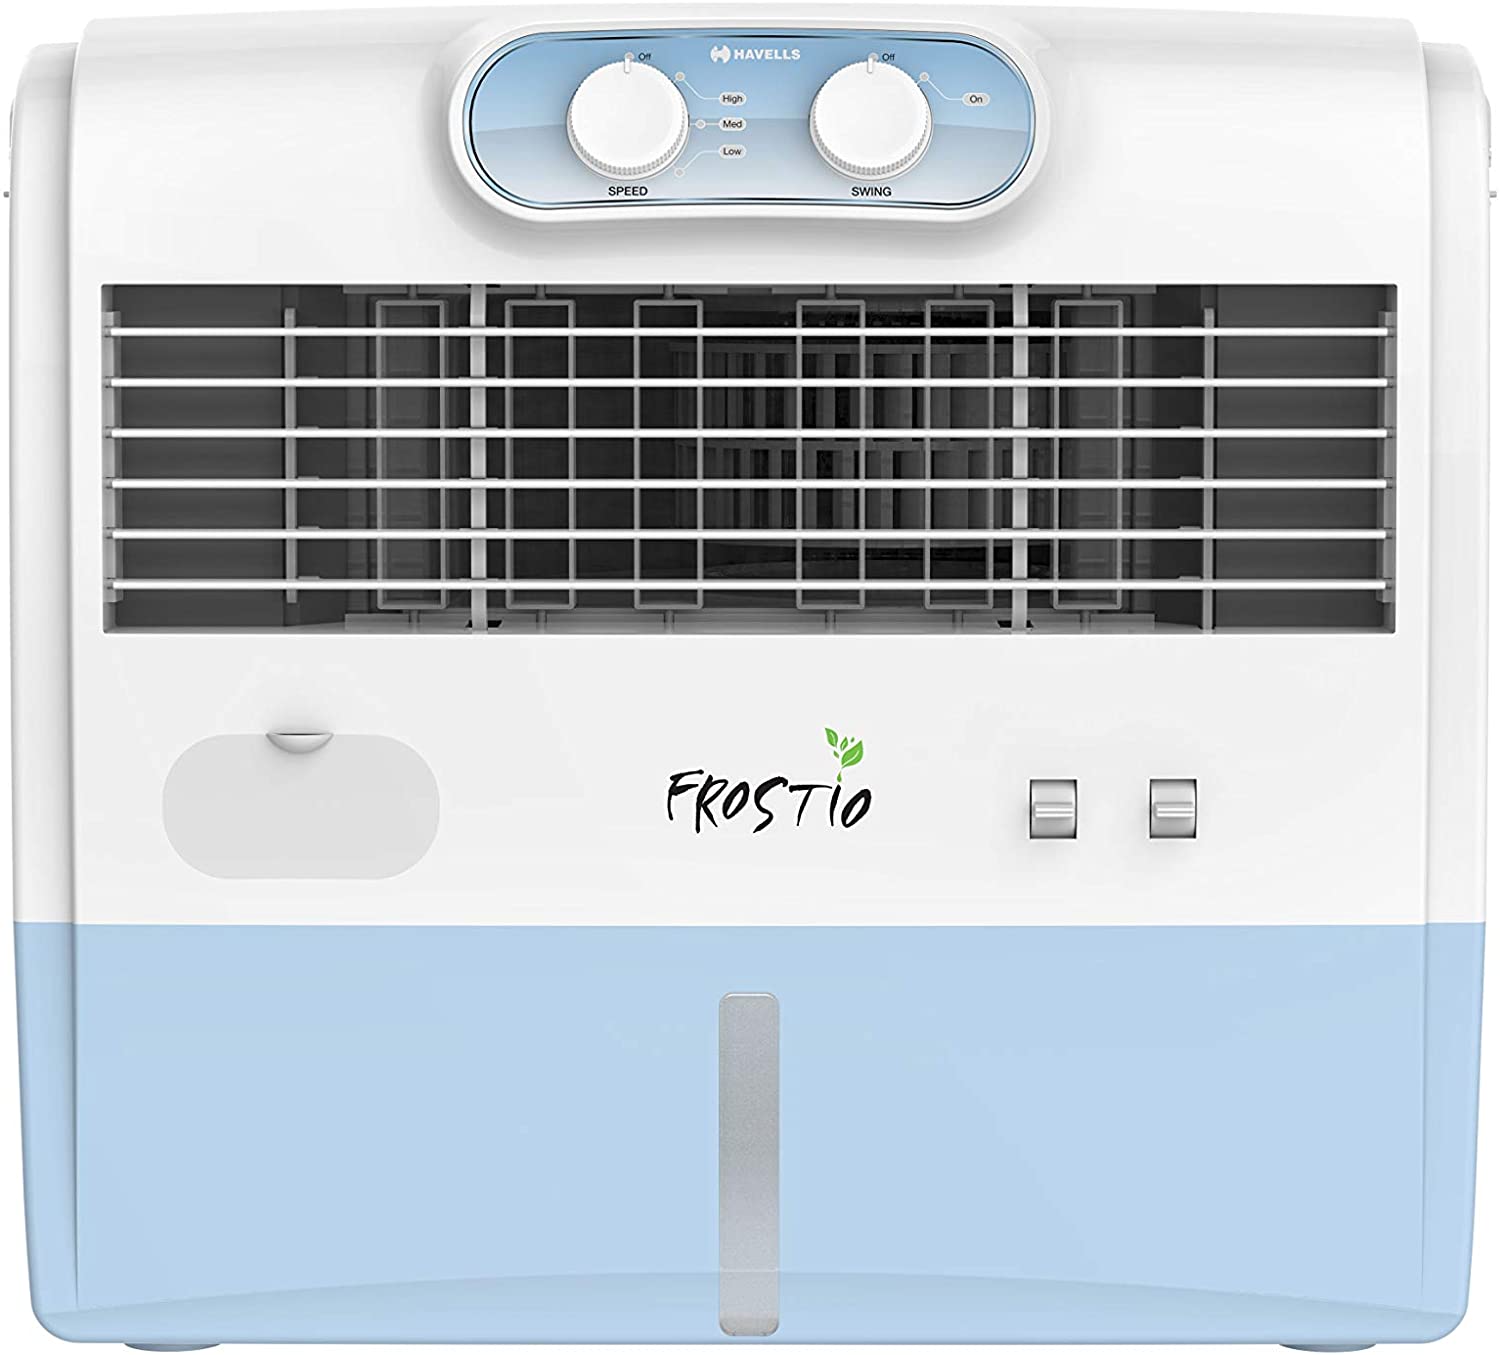 HAVELLS - AIR COOLER 45 FROSTIO